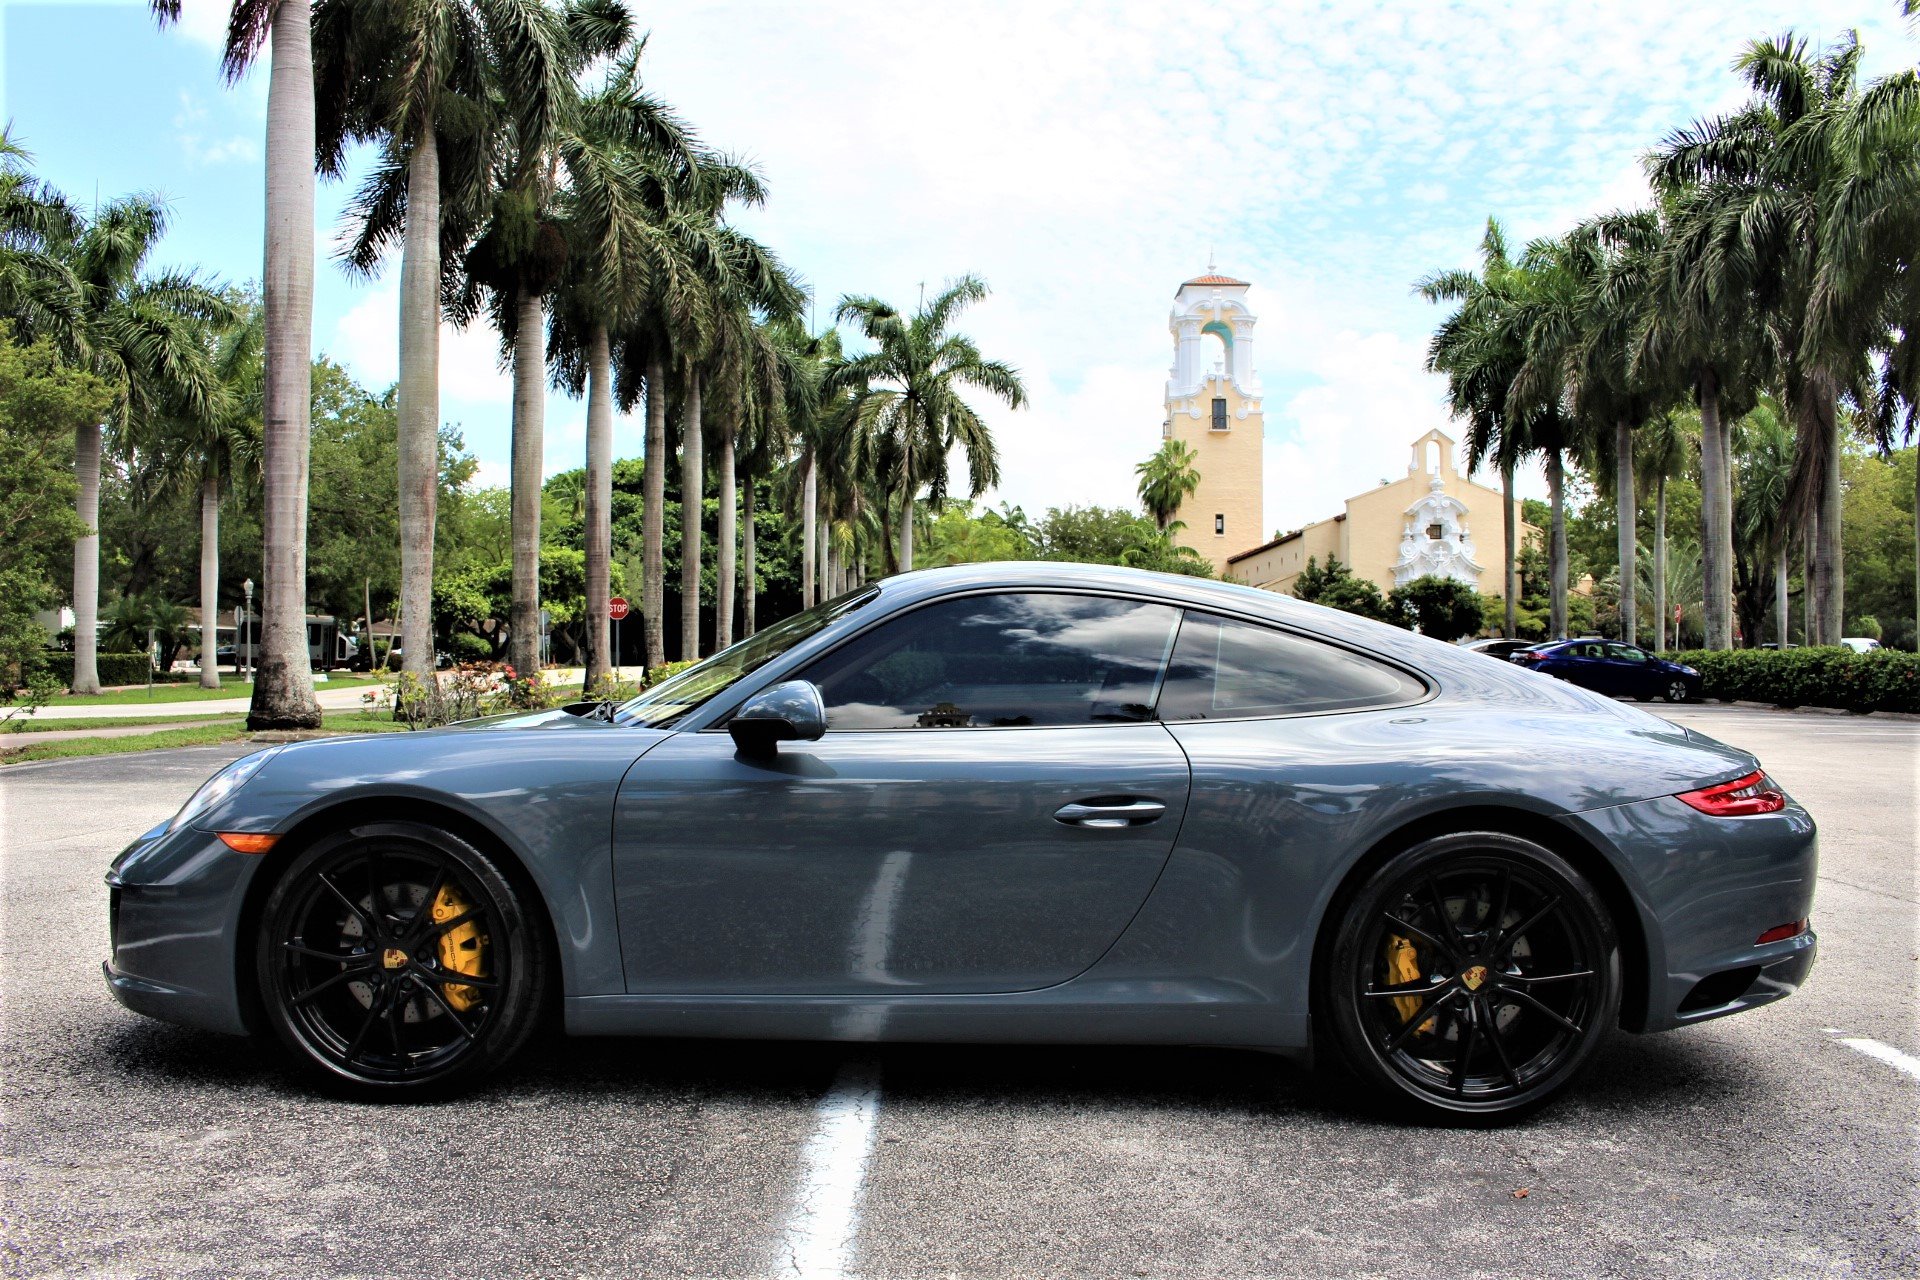 Used 2017 Porsche 911 Carrera for sale Sold at The Gables Sports Cars in Miami FL 33146 4